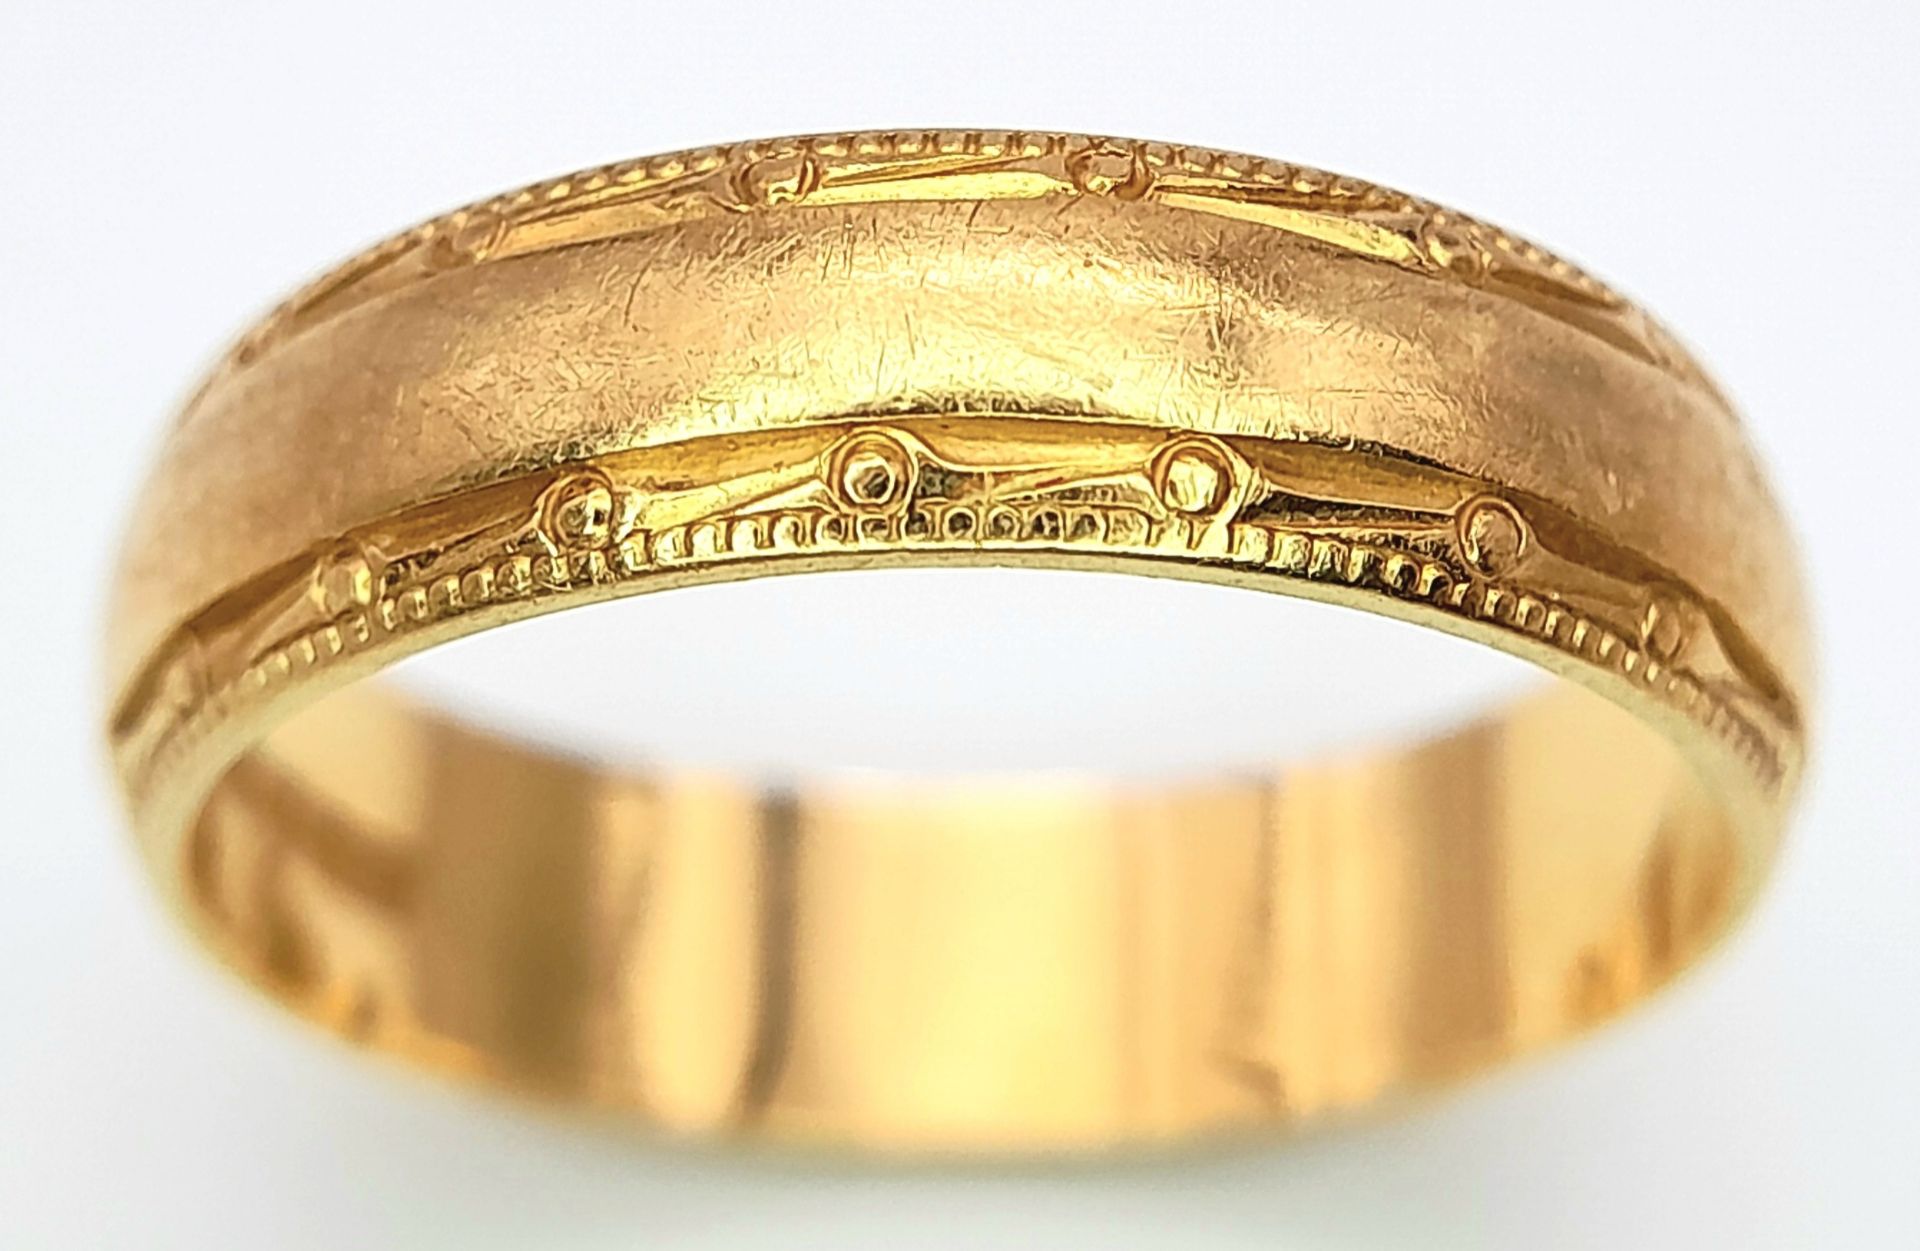 An 18 K yellow gold band ring with engraved rims. Size: M, weight: 3.5 g.